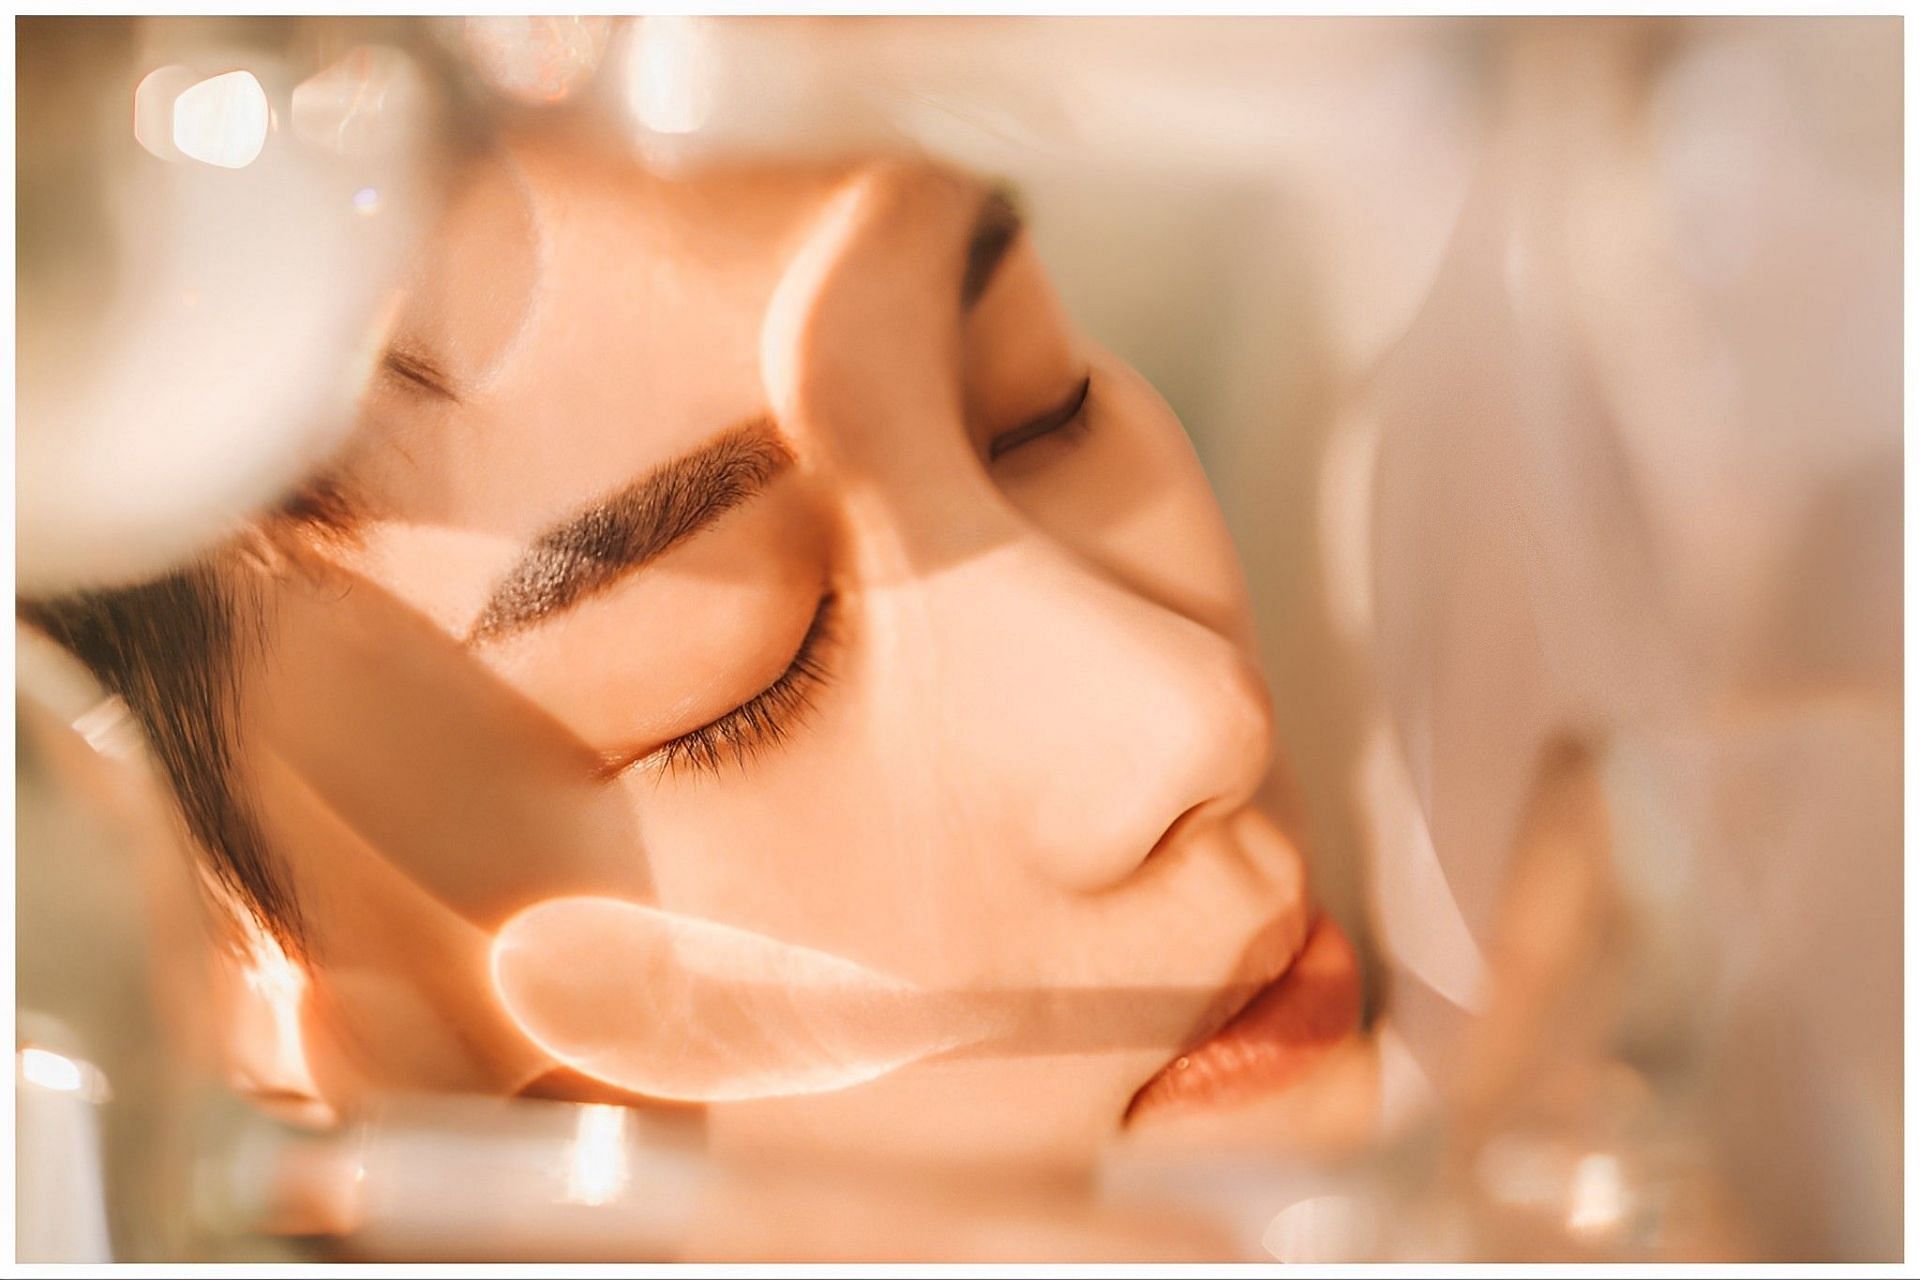 Benefits of slugging for skincare (Image spurced via Getty Images)